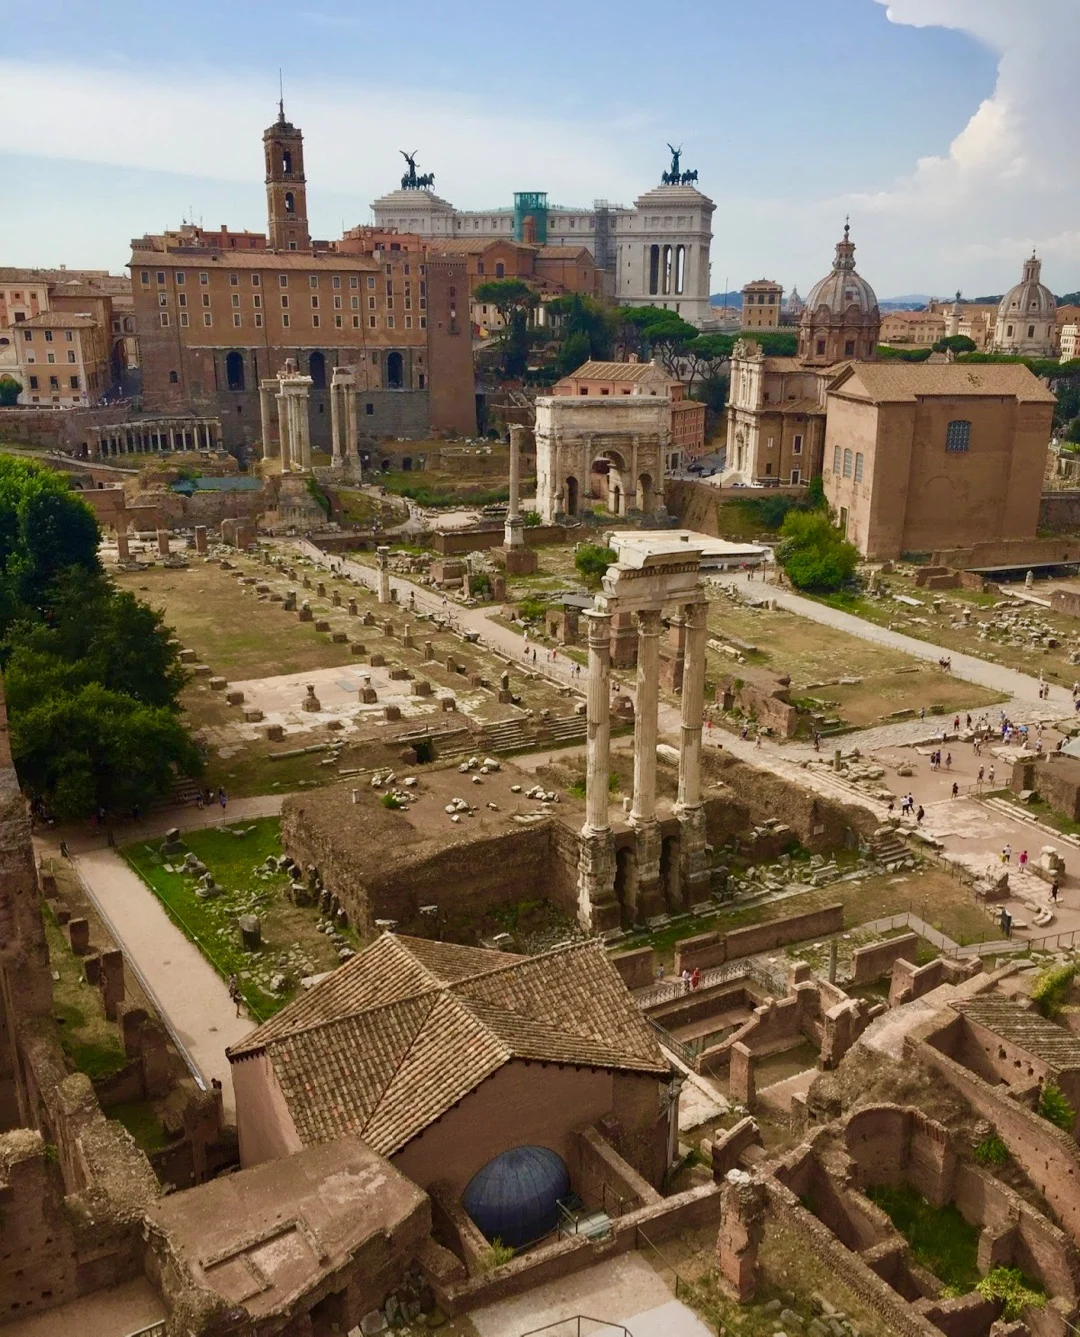 Teacher travel grants for History and Social Studies educators: 6 funded global education programs! The remains of the Forum in Rome, Italy.